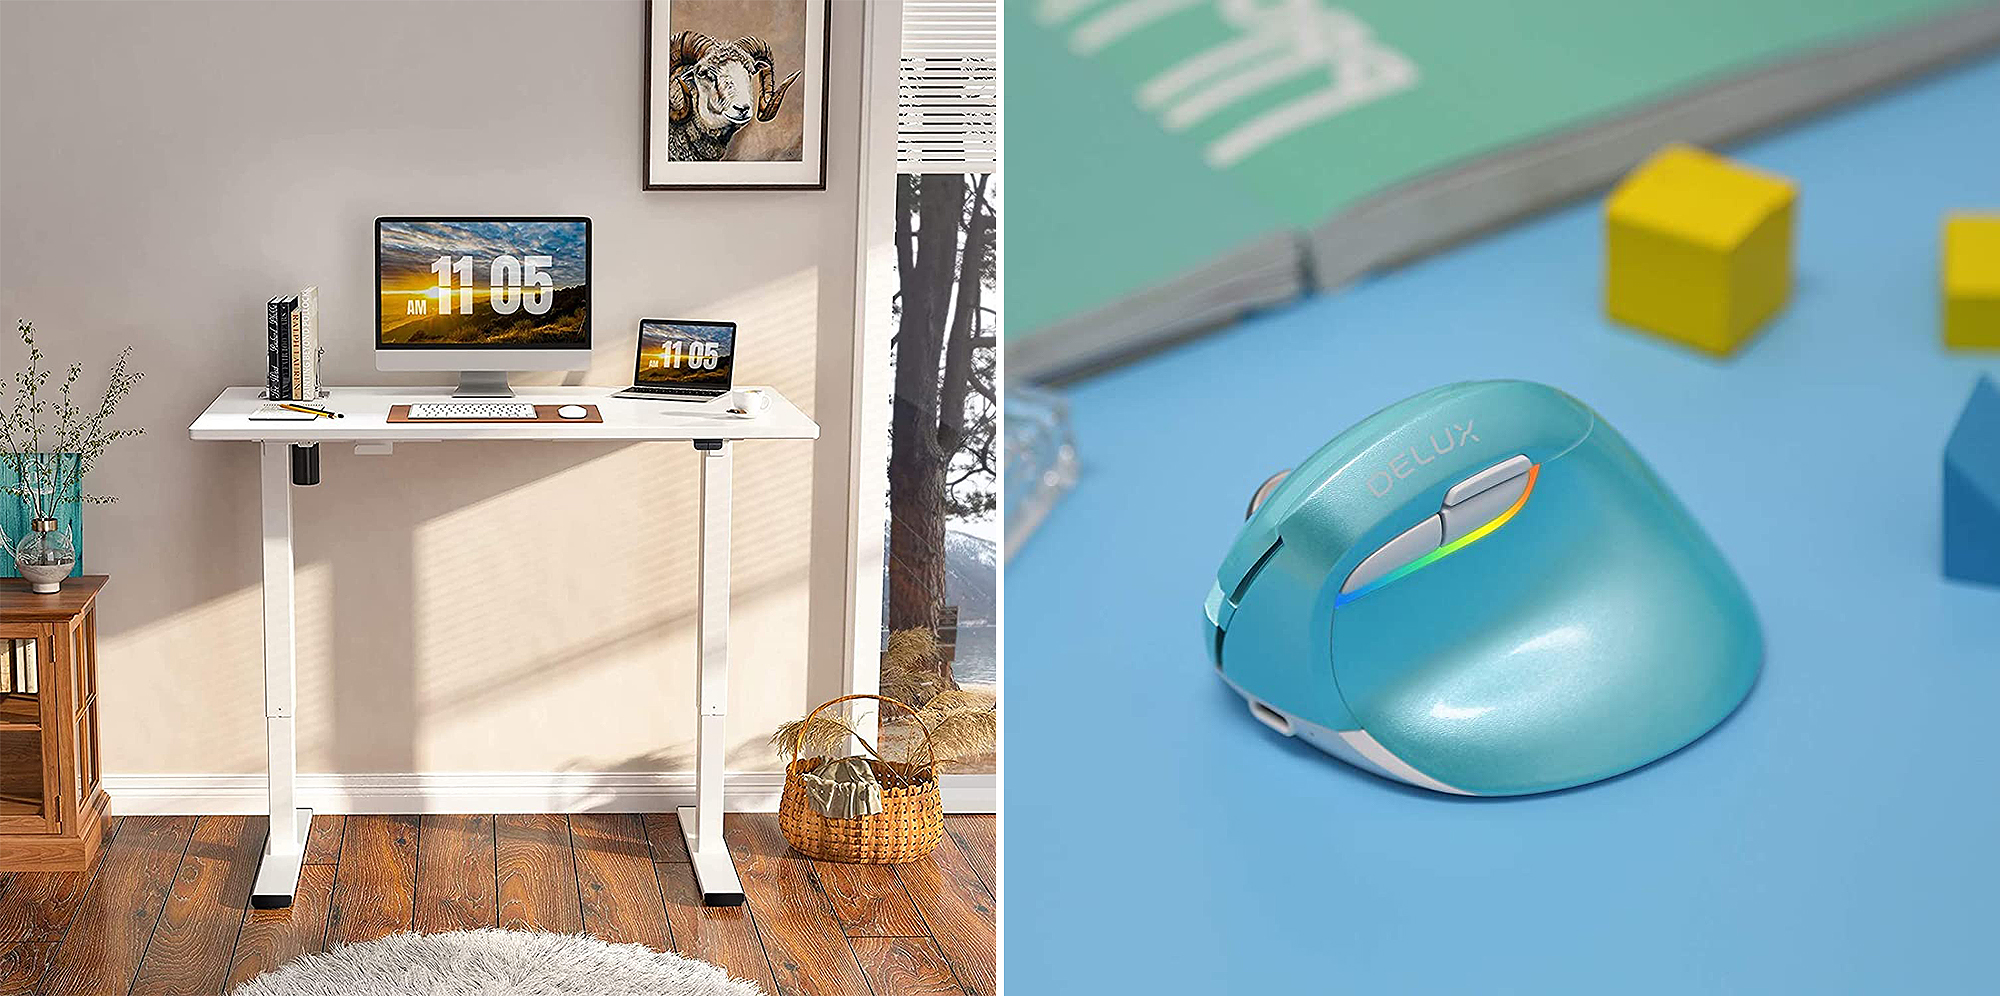 These Work-From-Home Office Accessories Are On Sale For Prime Day